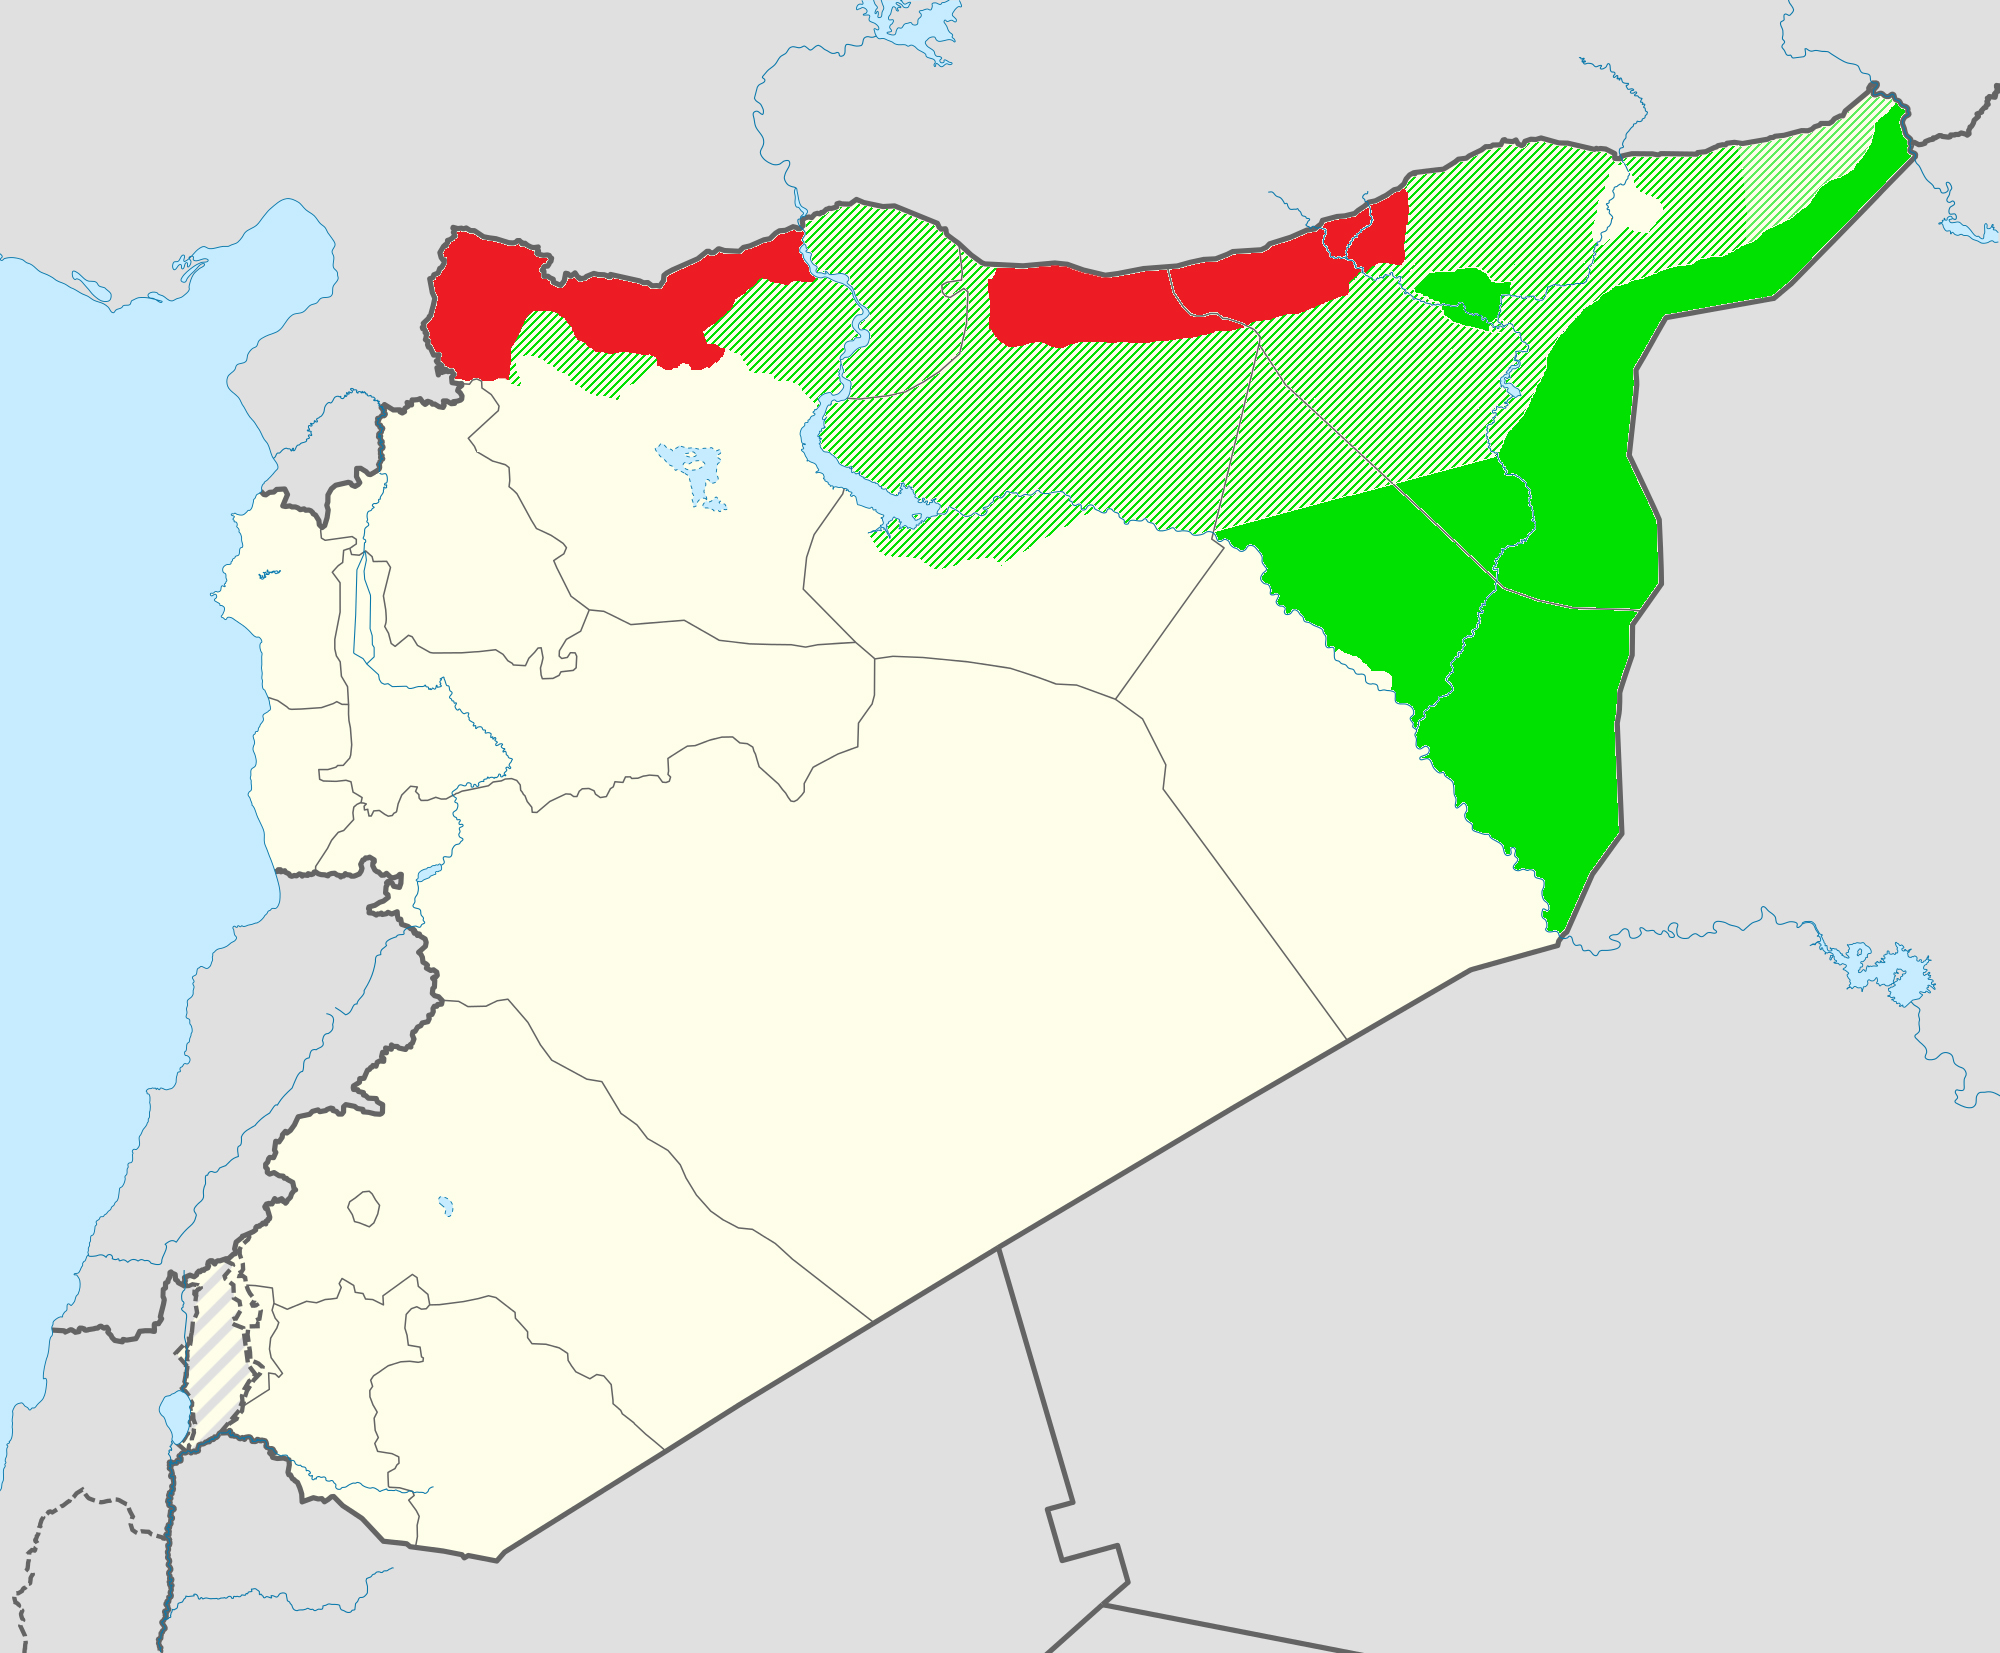 Claimed territory of Rojava, map